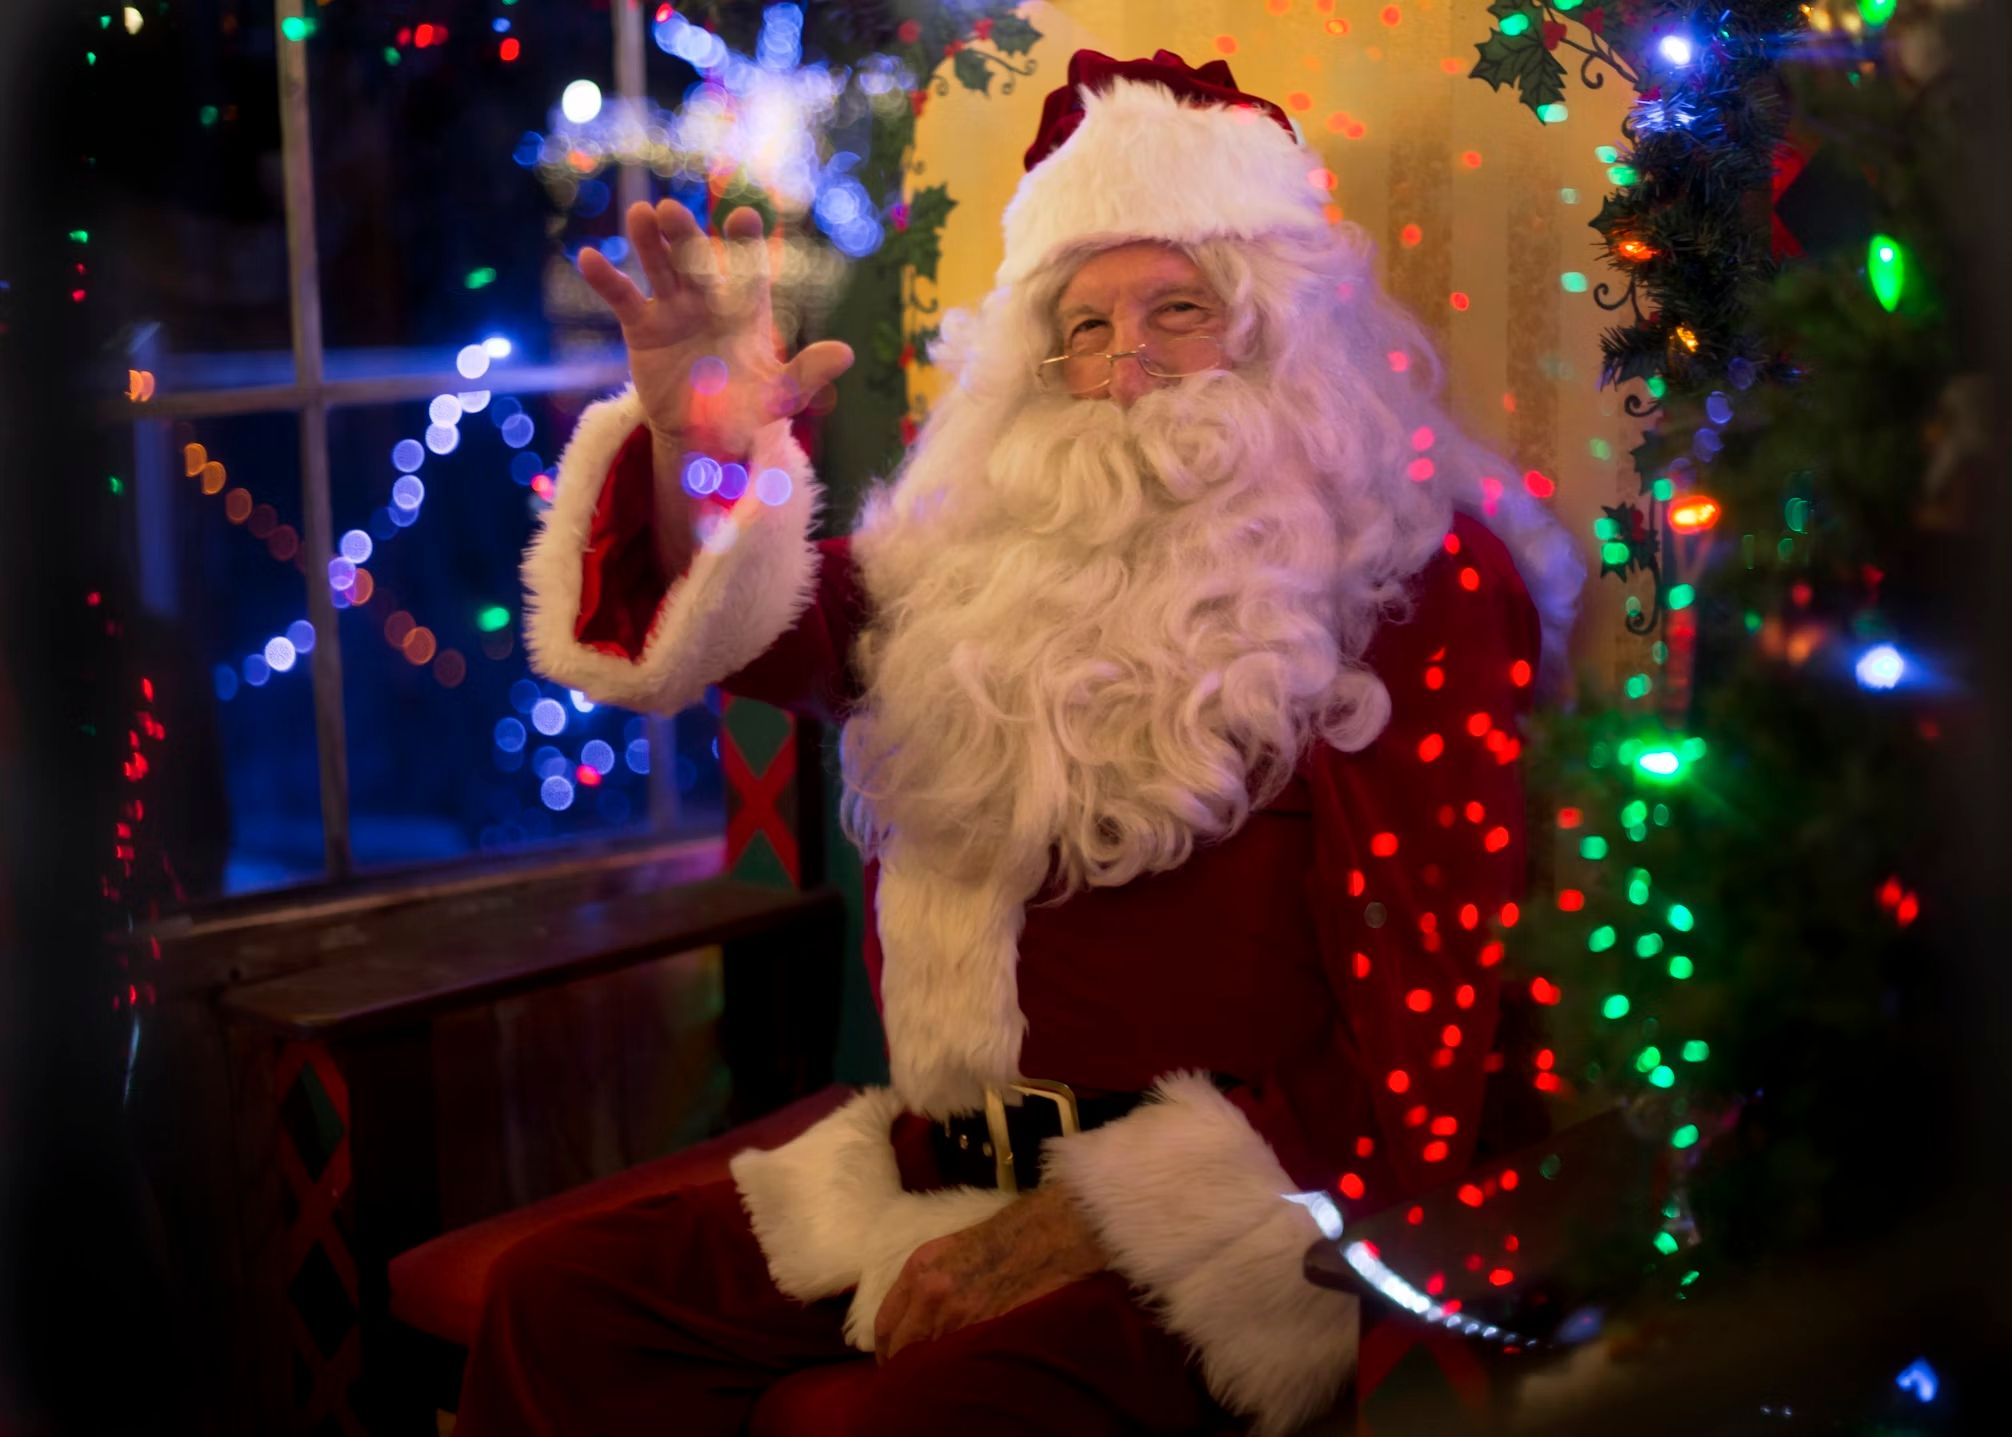 Jingle all the way to success: 6 entrepreneurial tips from Santa